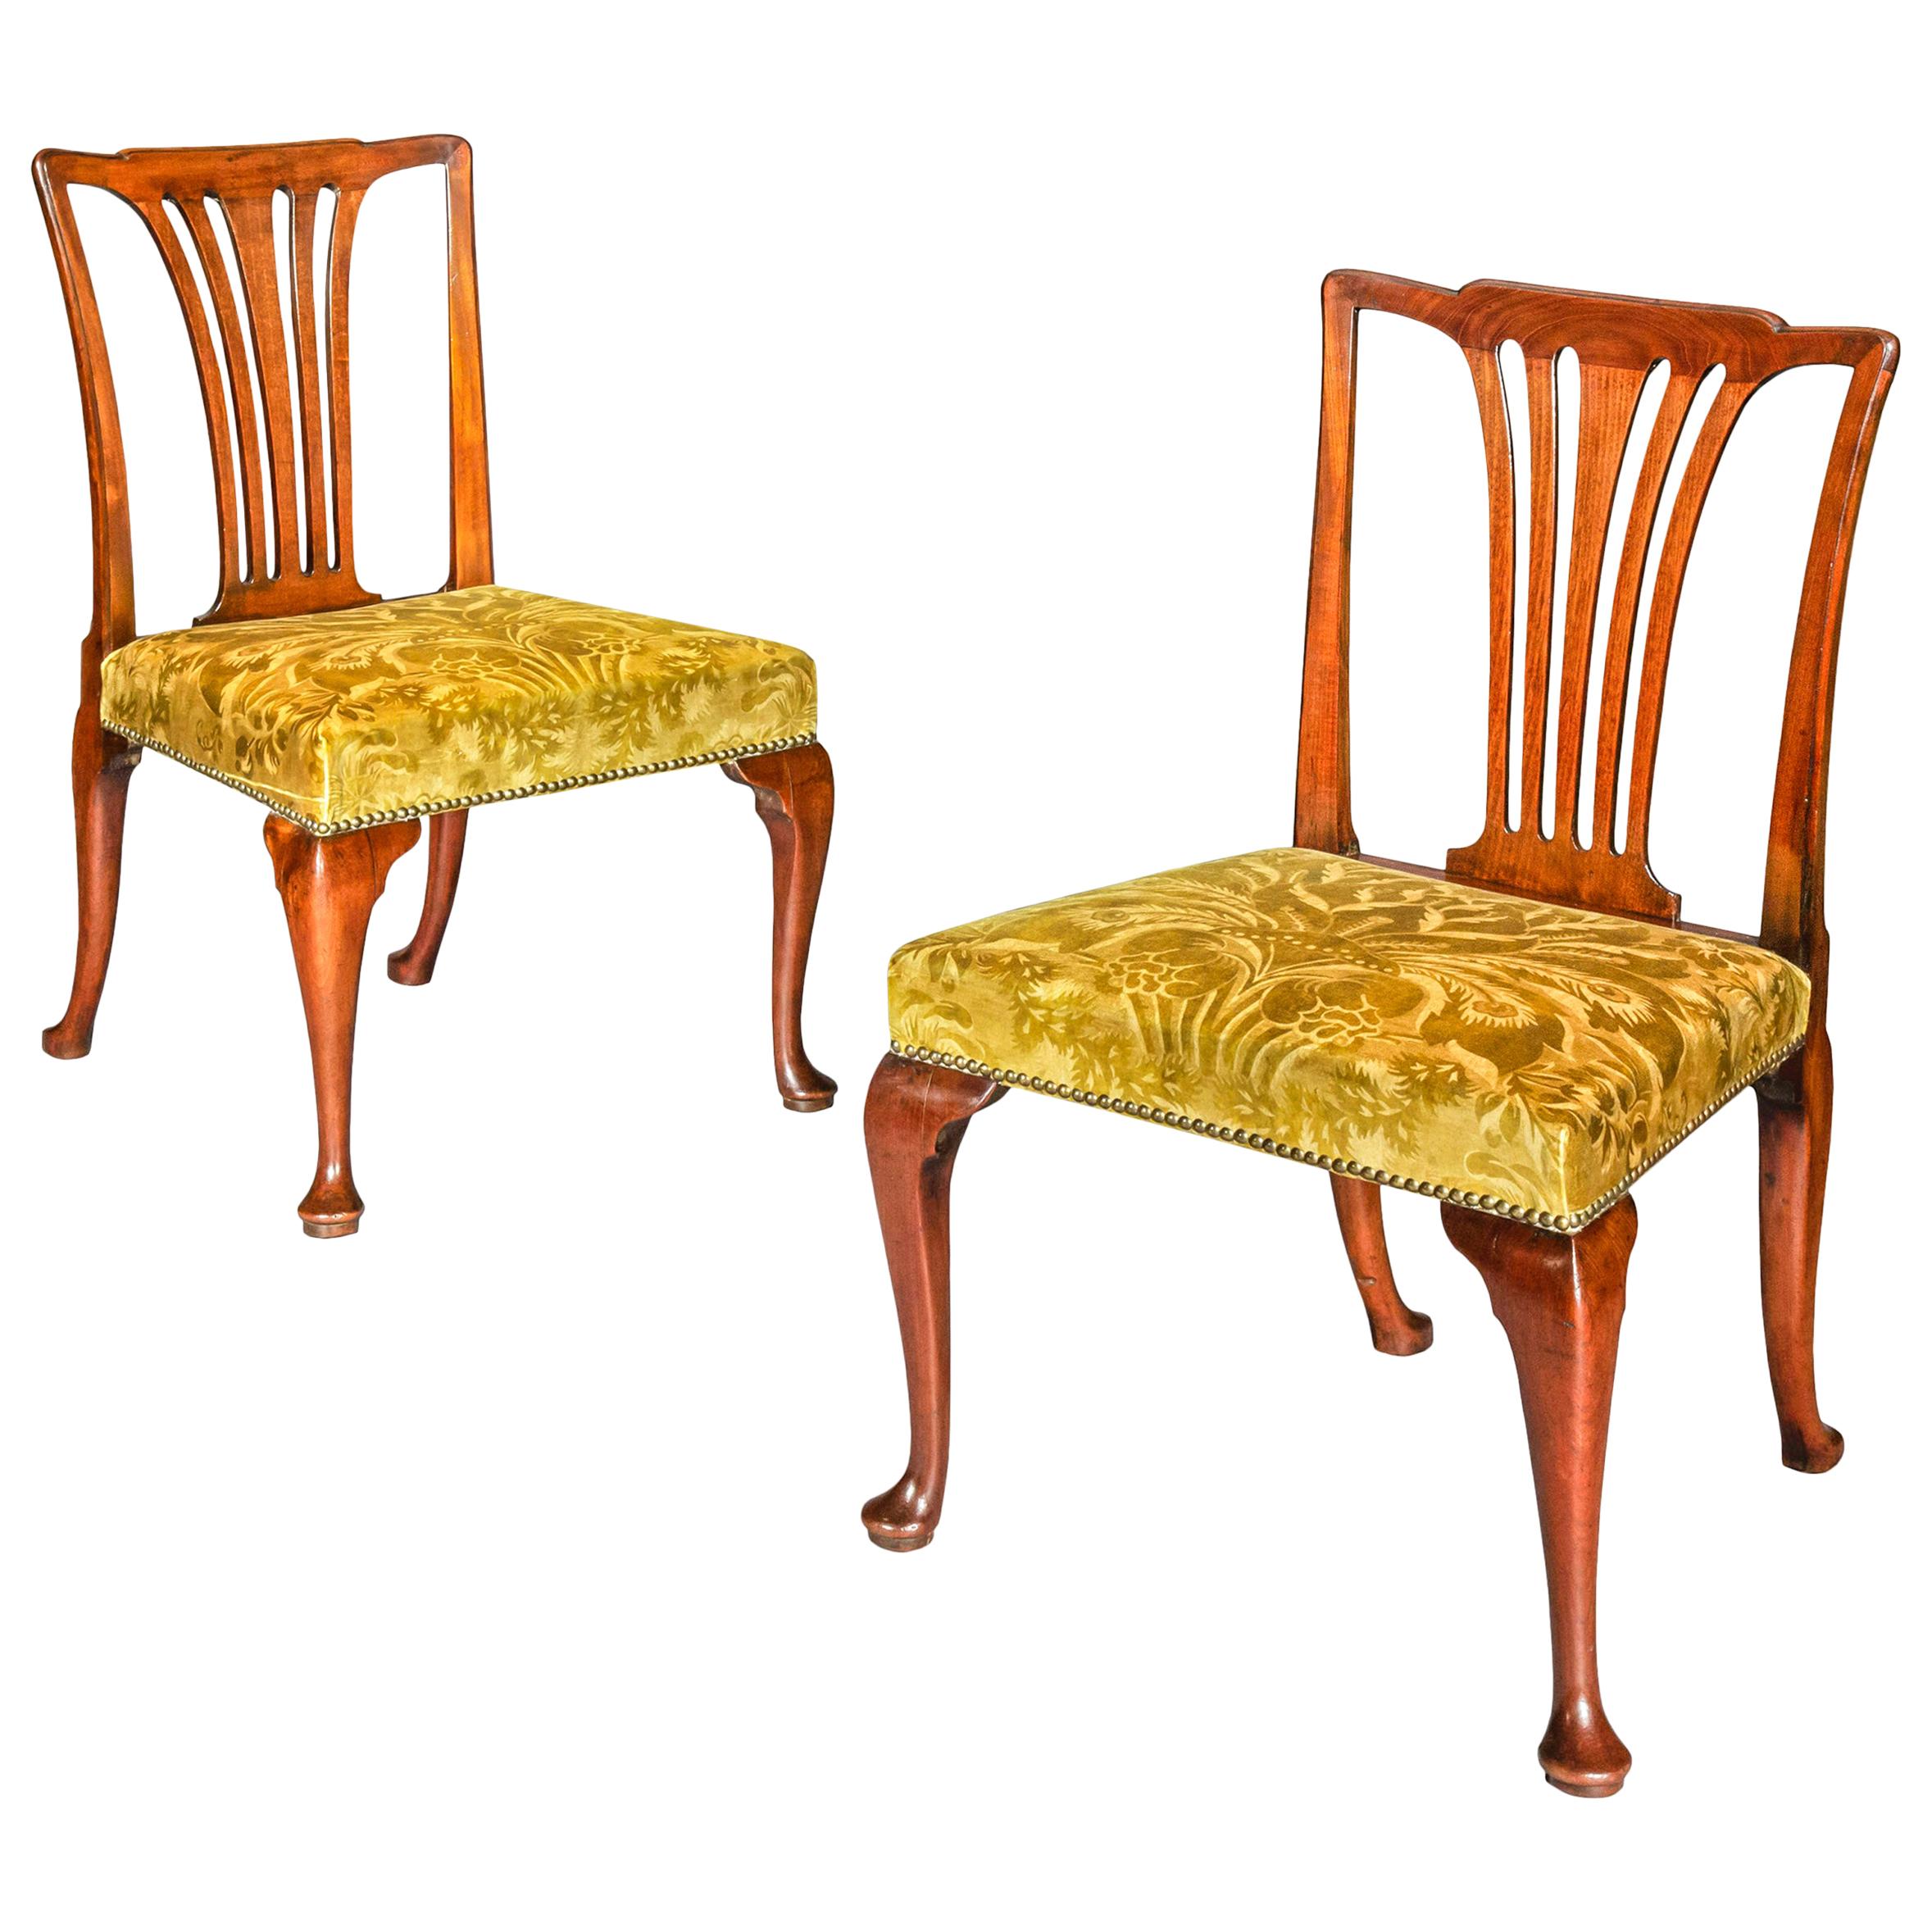 Pair of Antique Georgian Chairs Attributed to Giles Grendey